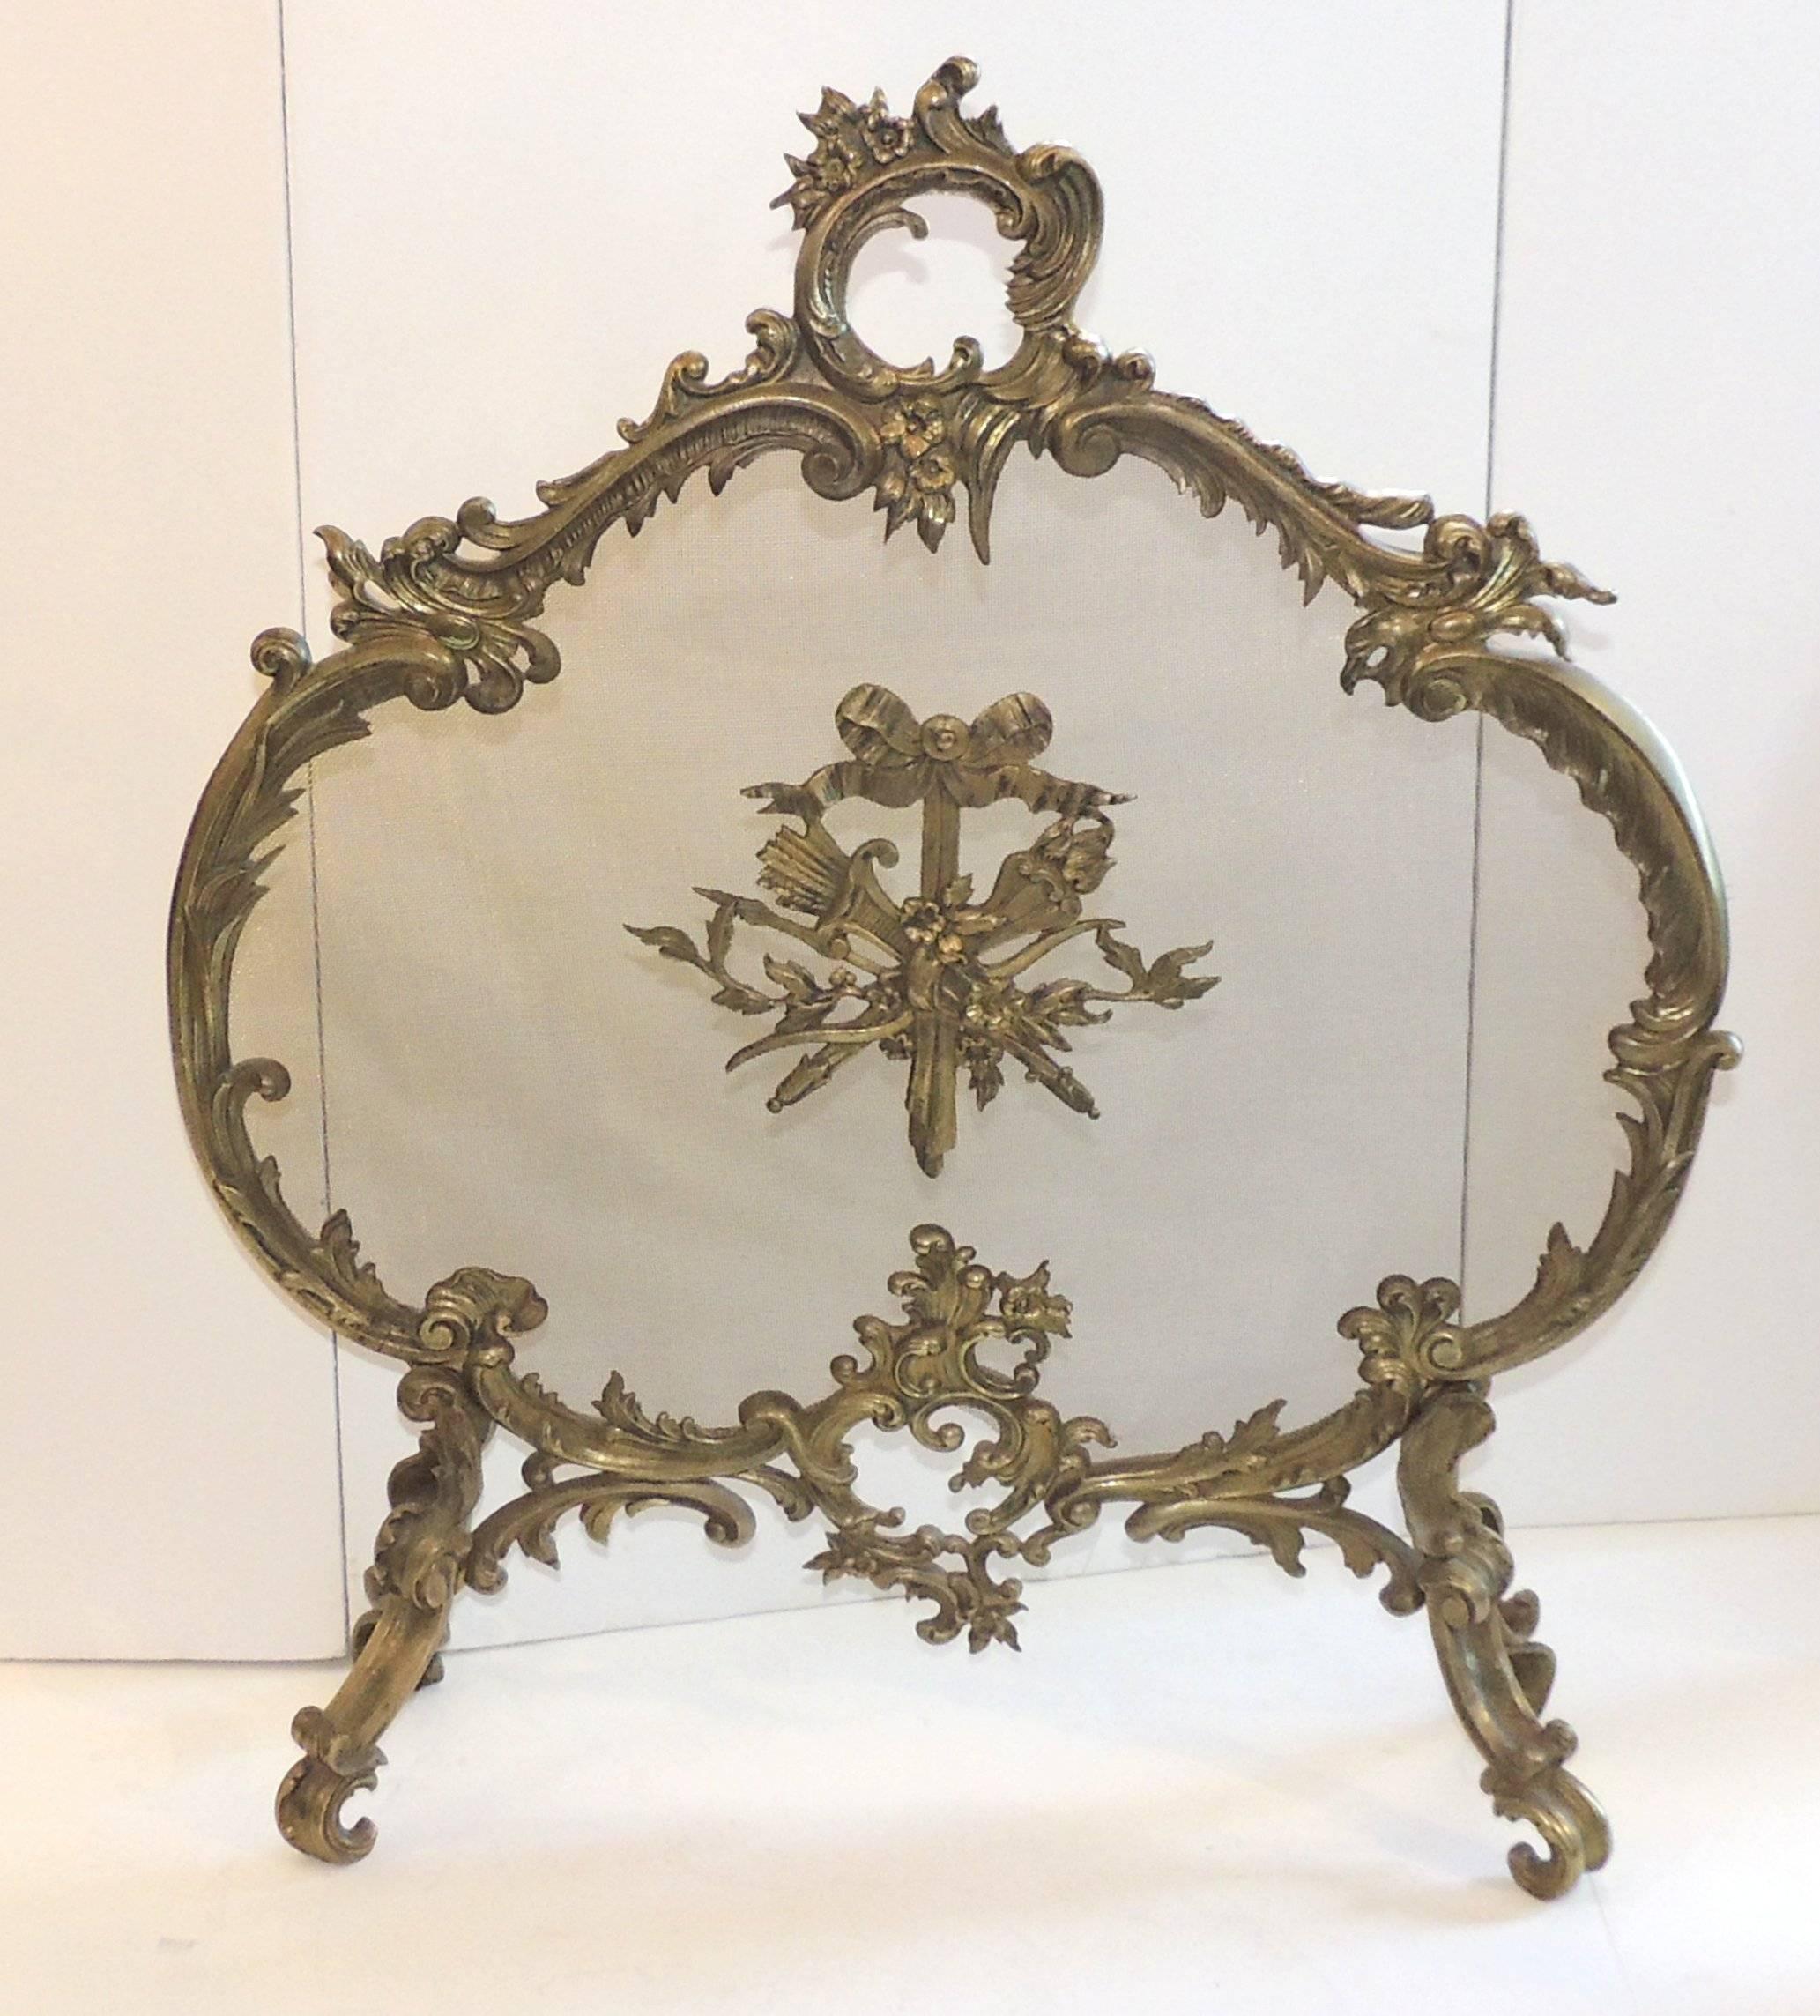 Elegant French bronze fire screen with filigree and bows surrounding the screen and with scroll and filigree feet.

Measures: 26